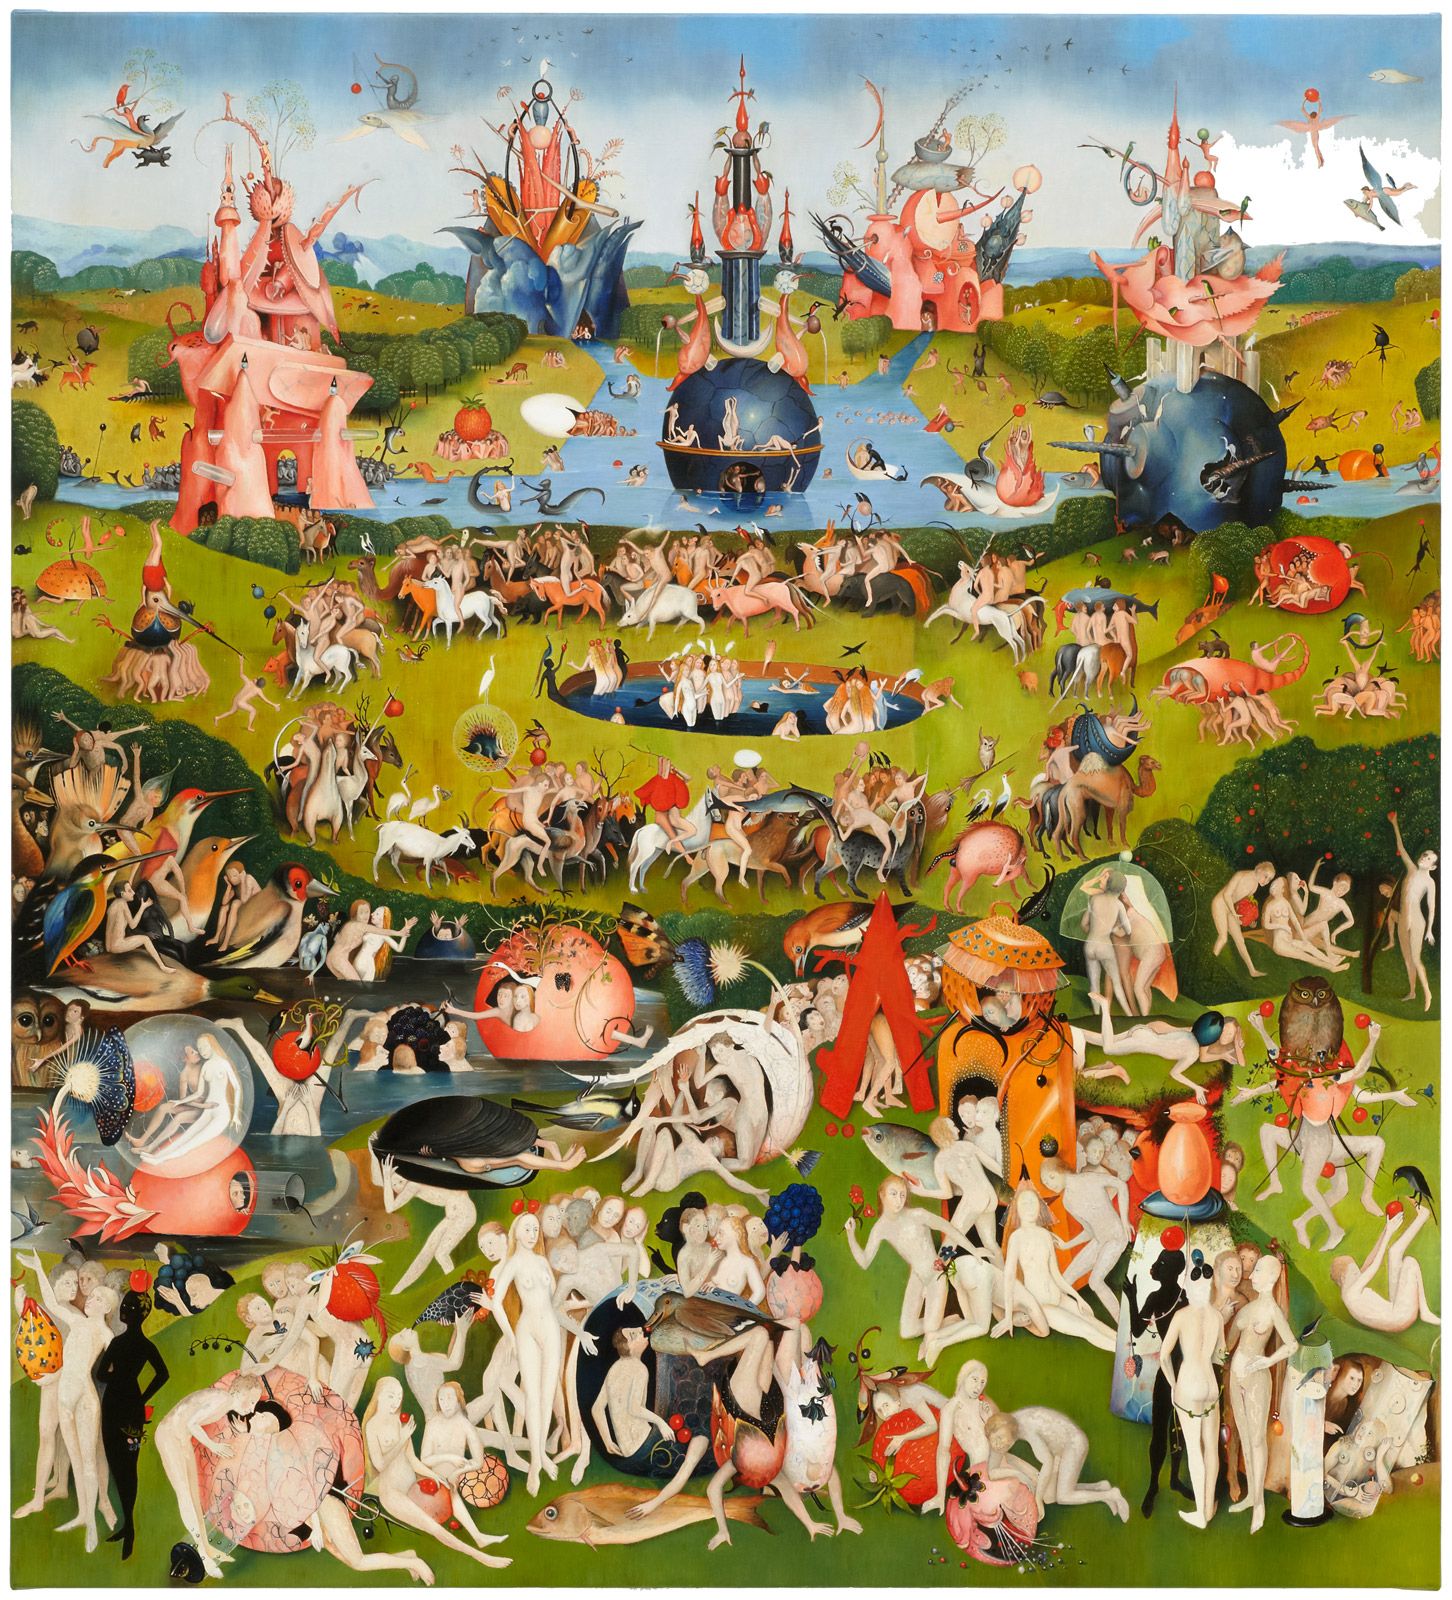 Intricate reimagining of Hieronymus Bosch’s magnum opus, "The Garden of Earthly Delights" (1490-1510) by Mark Alexander.